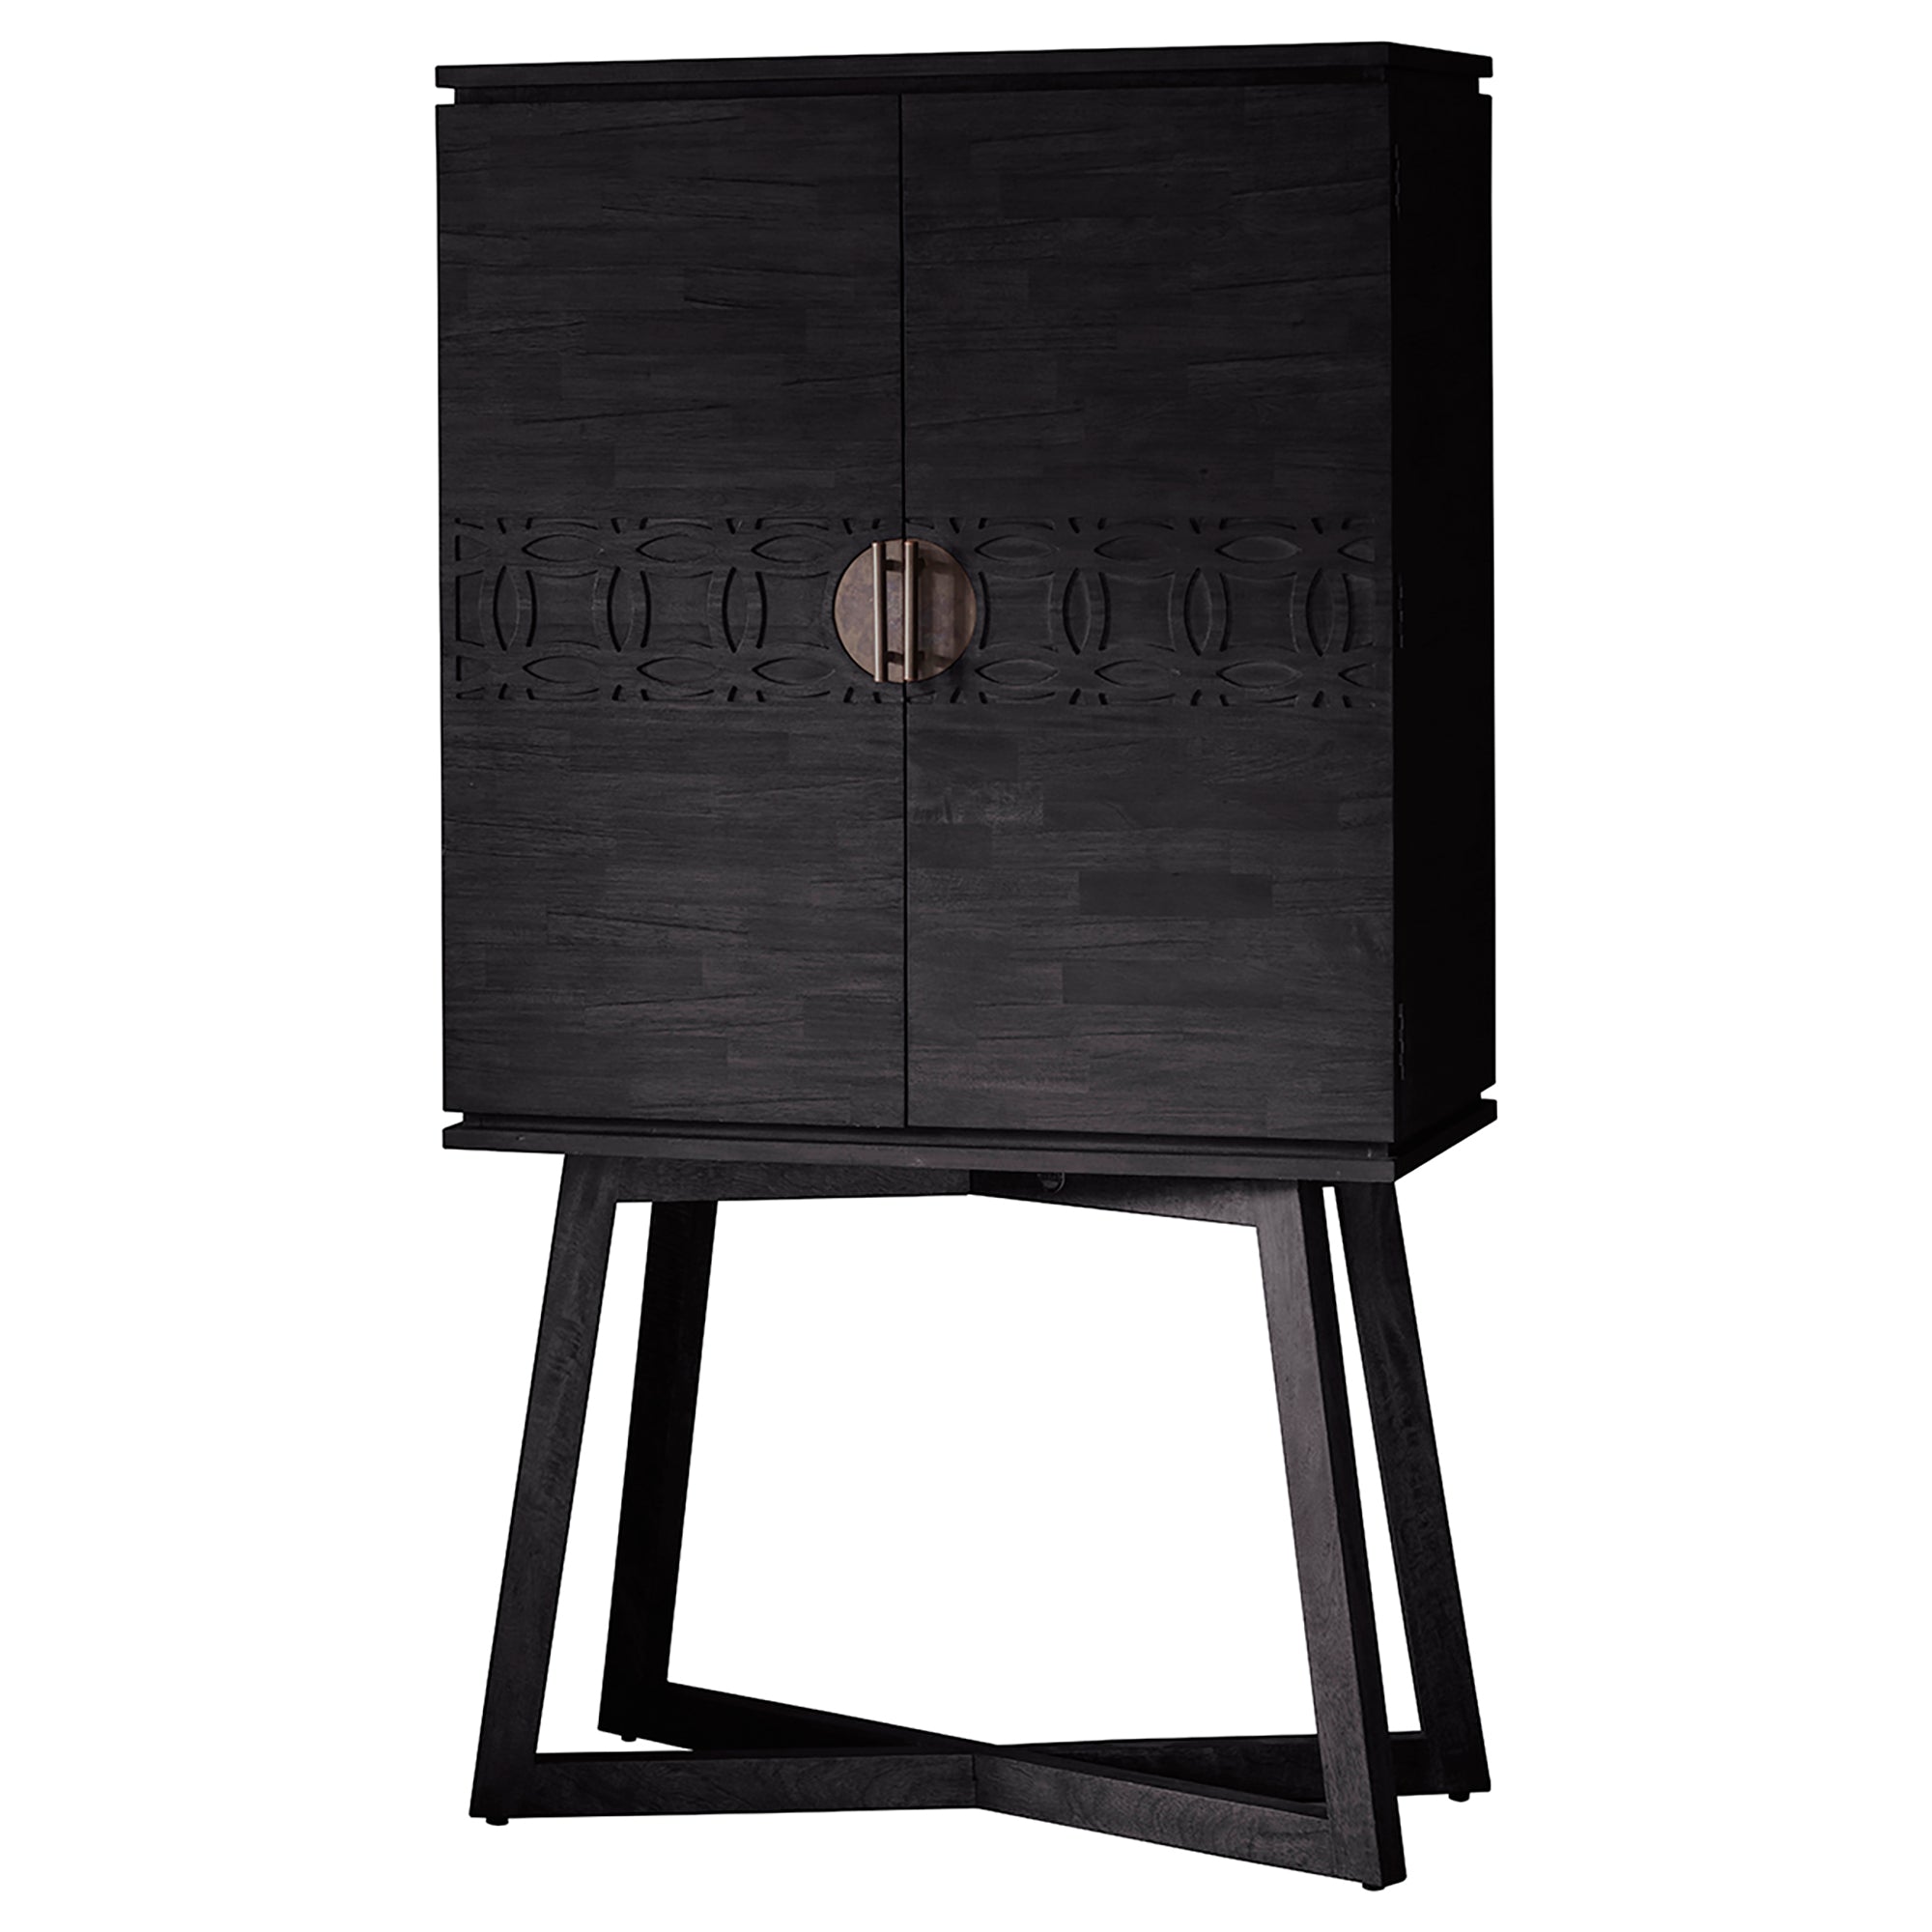 The Beautiful Cocktail Cabinet